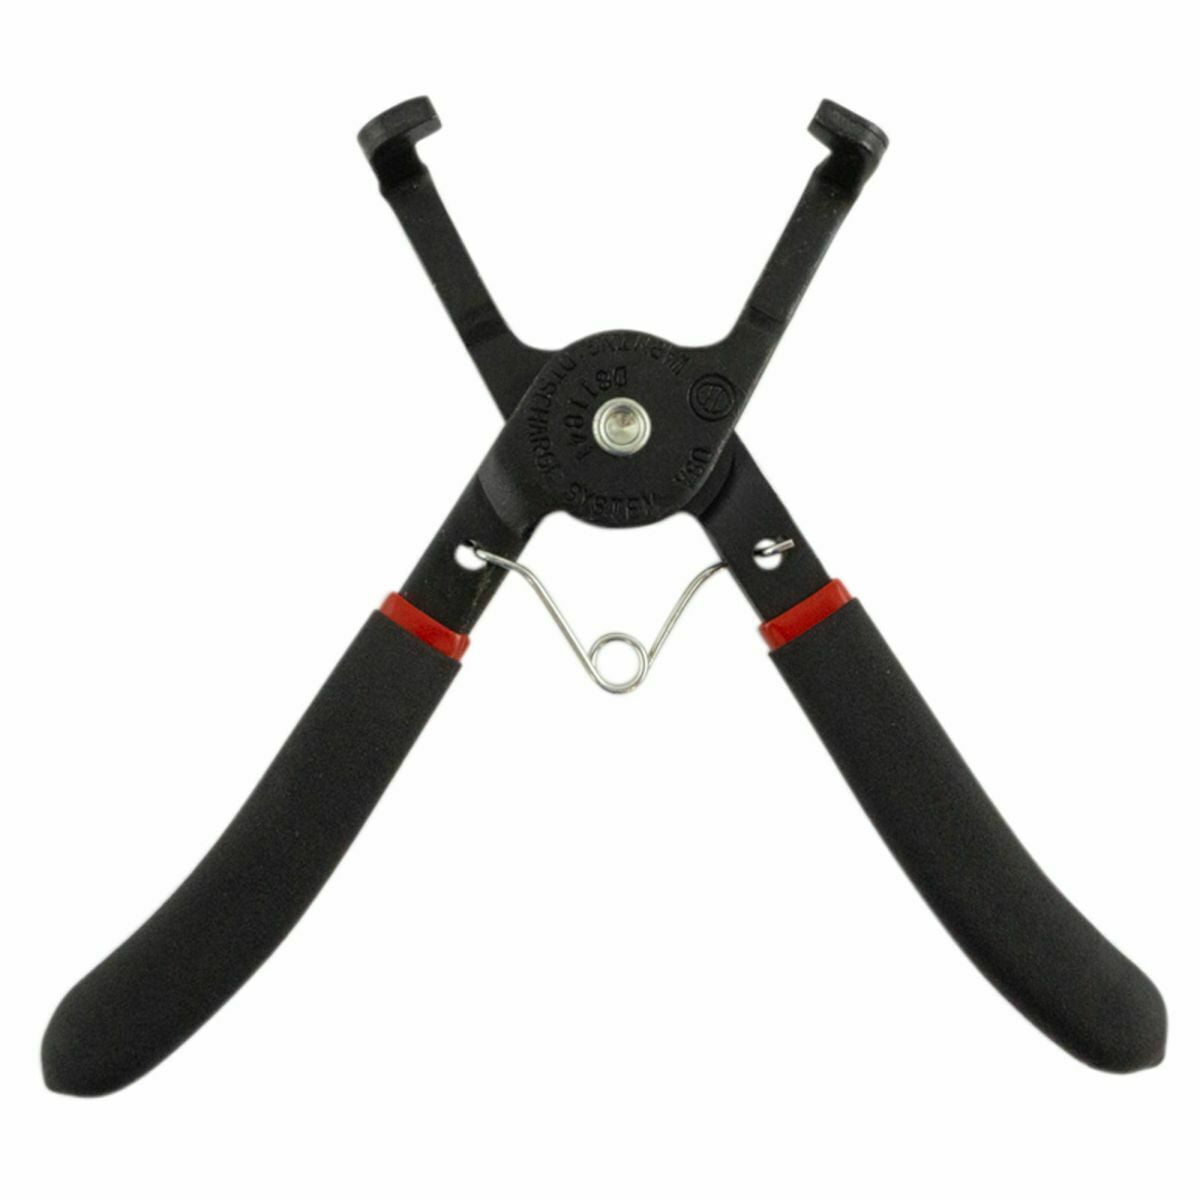 37160 Electrical connector, Fuel & Evap Line Disconnect Pliers Tool 